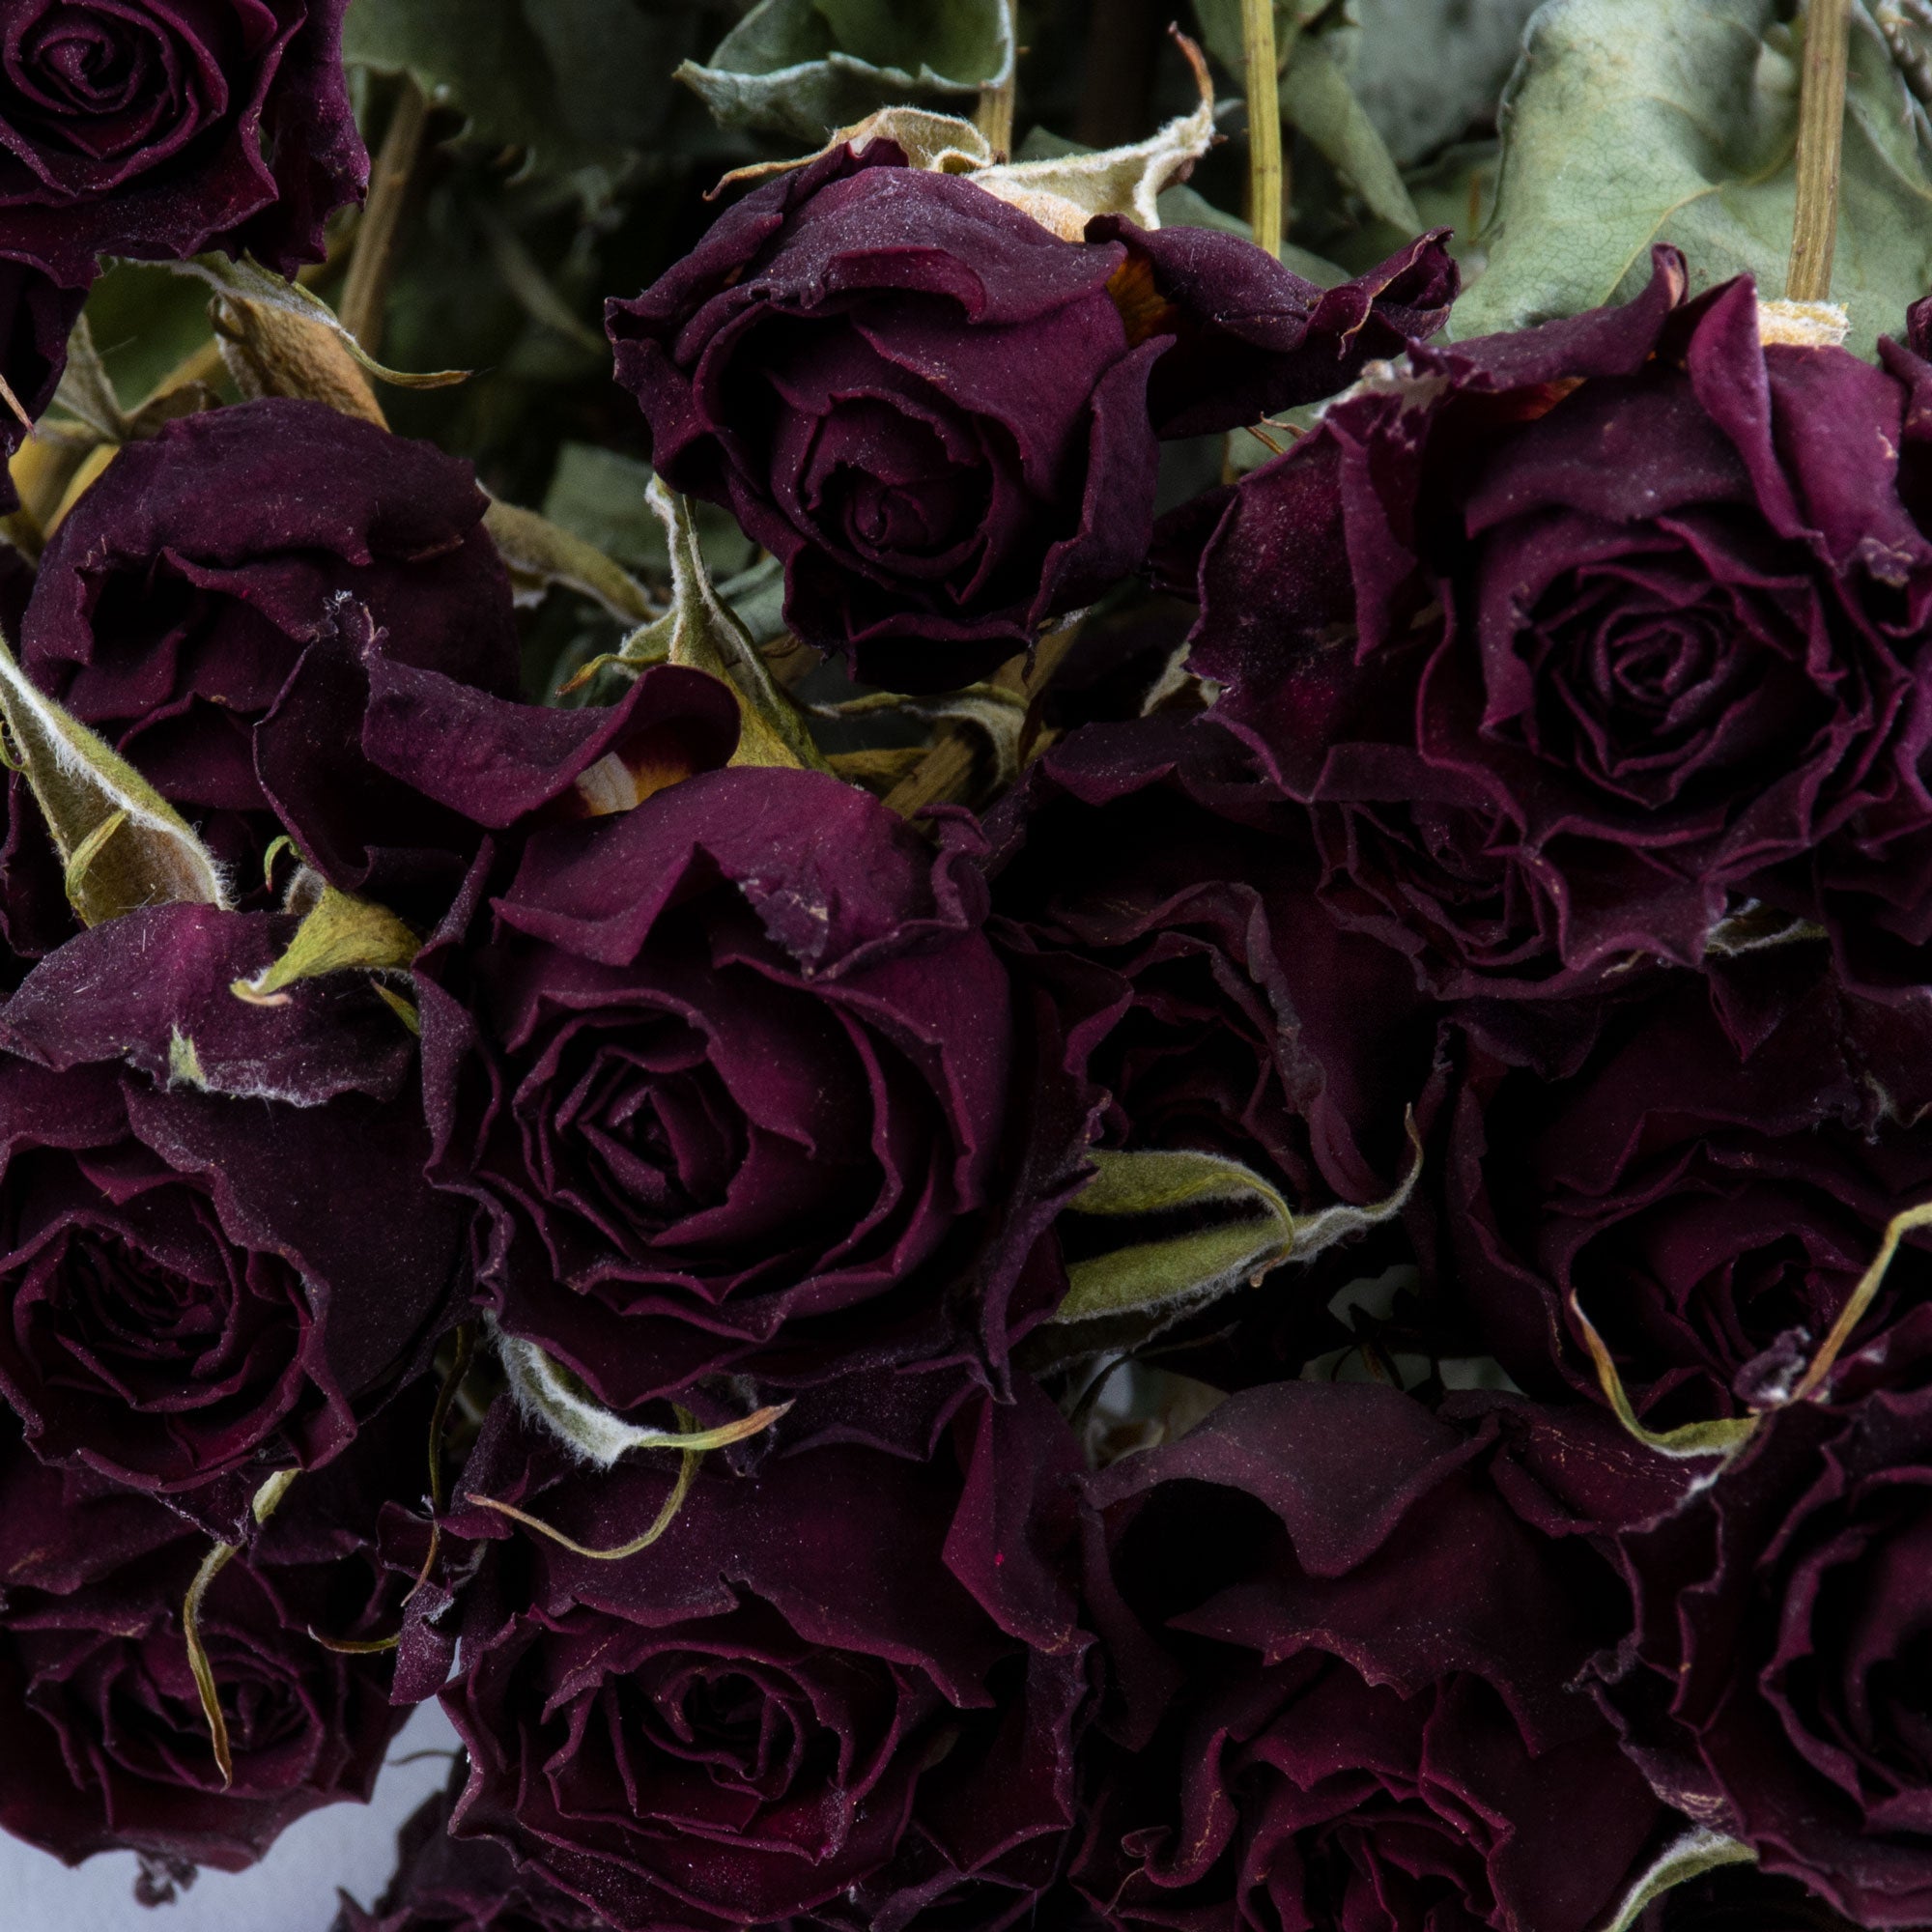 This image shows a bunch of dark red spray roses, against a white background